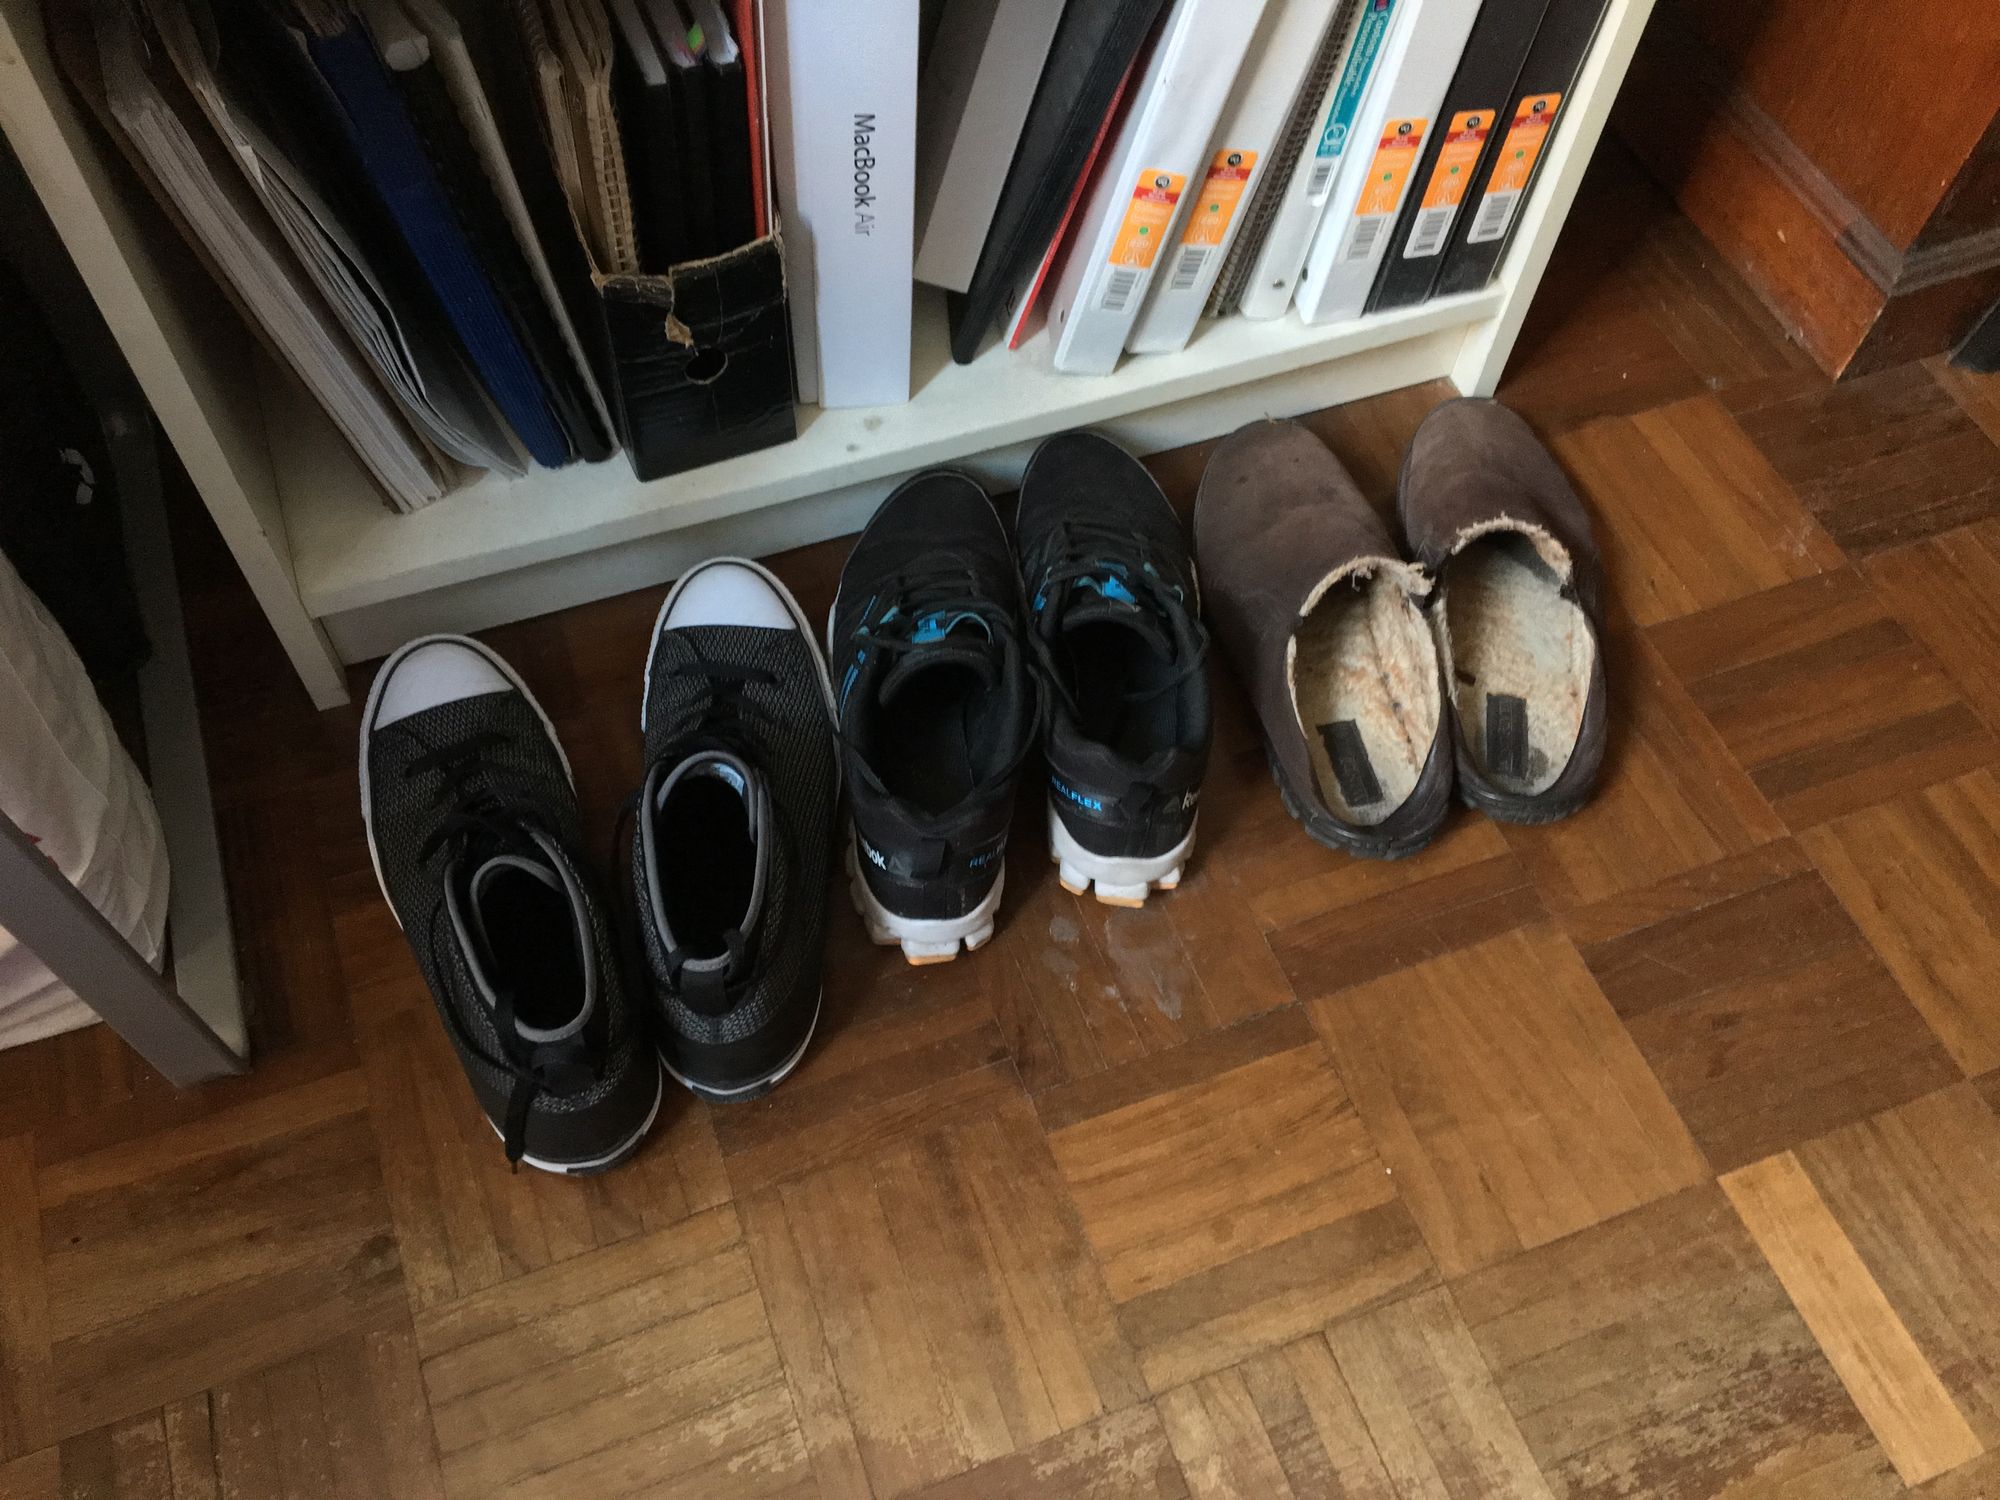 Shoes on the floor